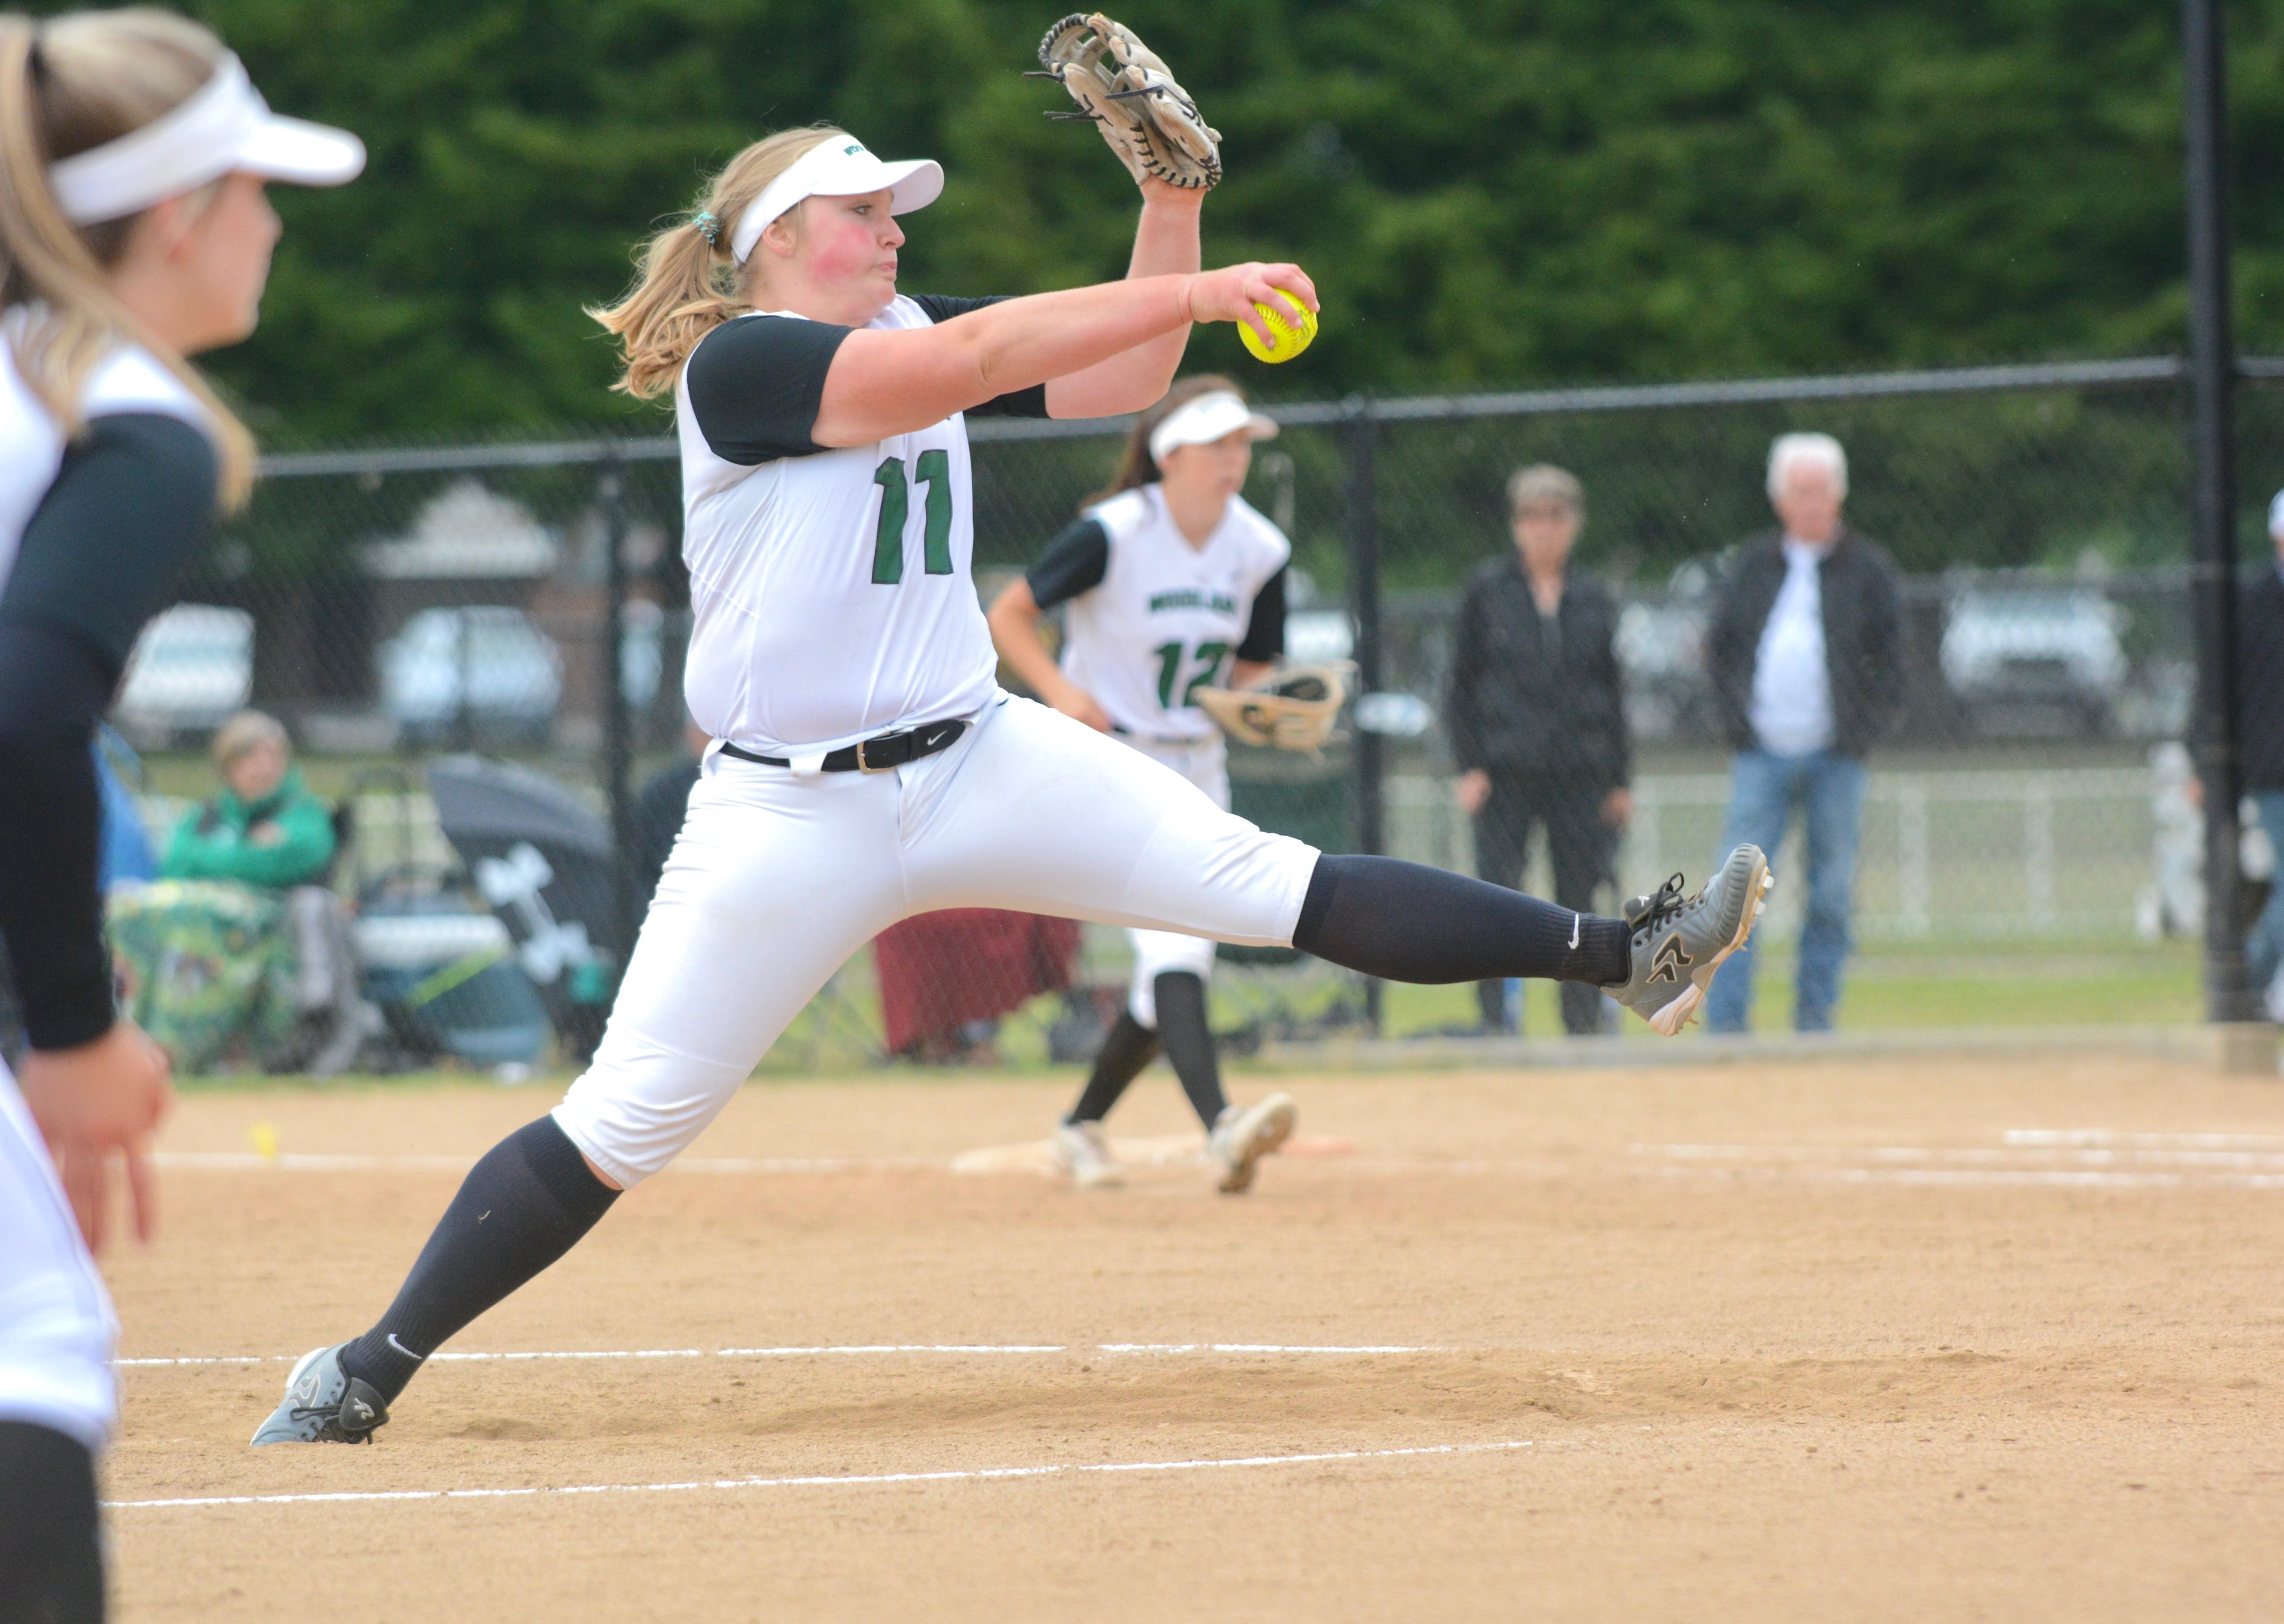 Woodland pitcher Olivia Grey winds up to throw a pitch during the Beavers' 6-2 win over Tumwater in the 2A district softball tournament at Fort Borst Park in Centralia on Friday, May 18, 2018 (Andy Buhler/Columbian staff).